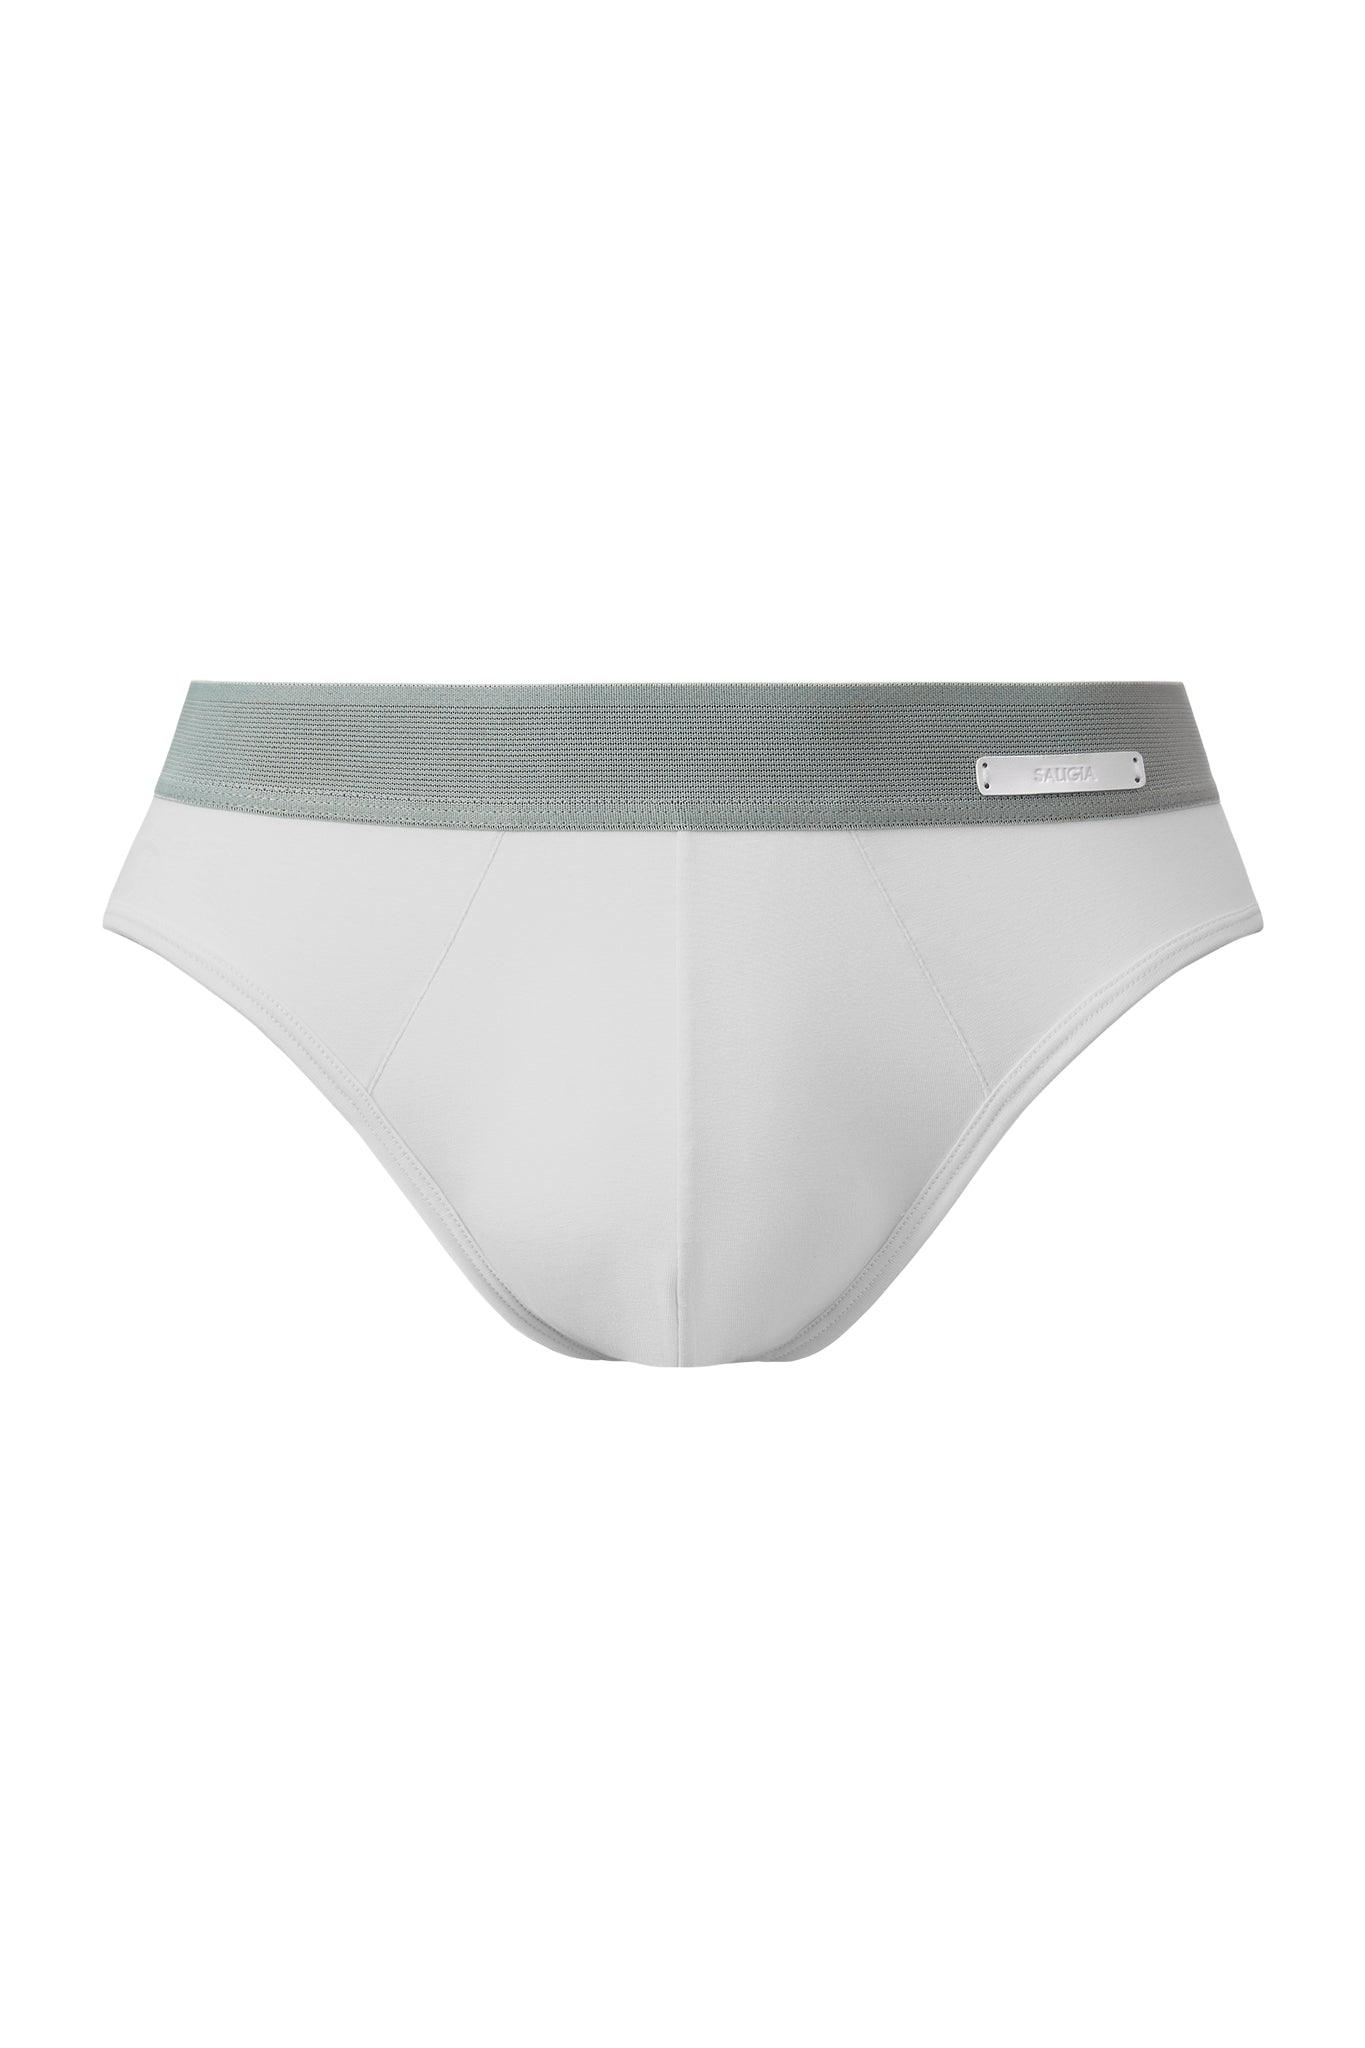 VIOLET GRAY SOOTHING SUMMER BRIEF